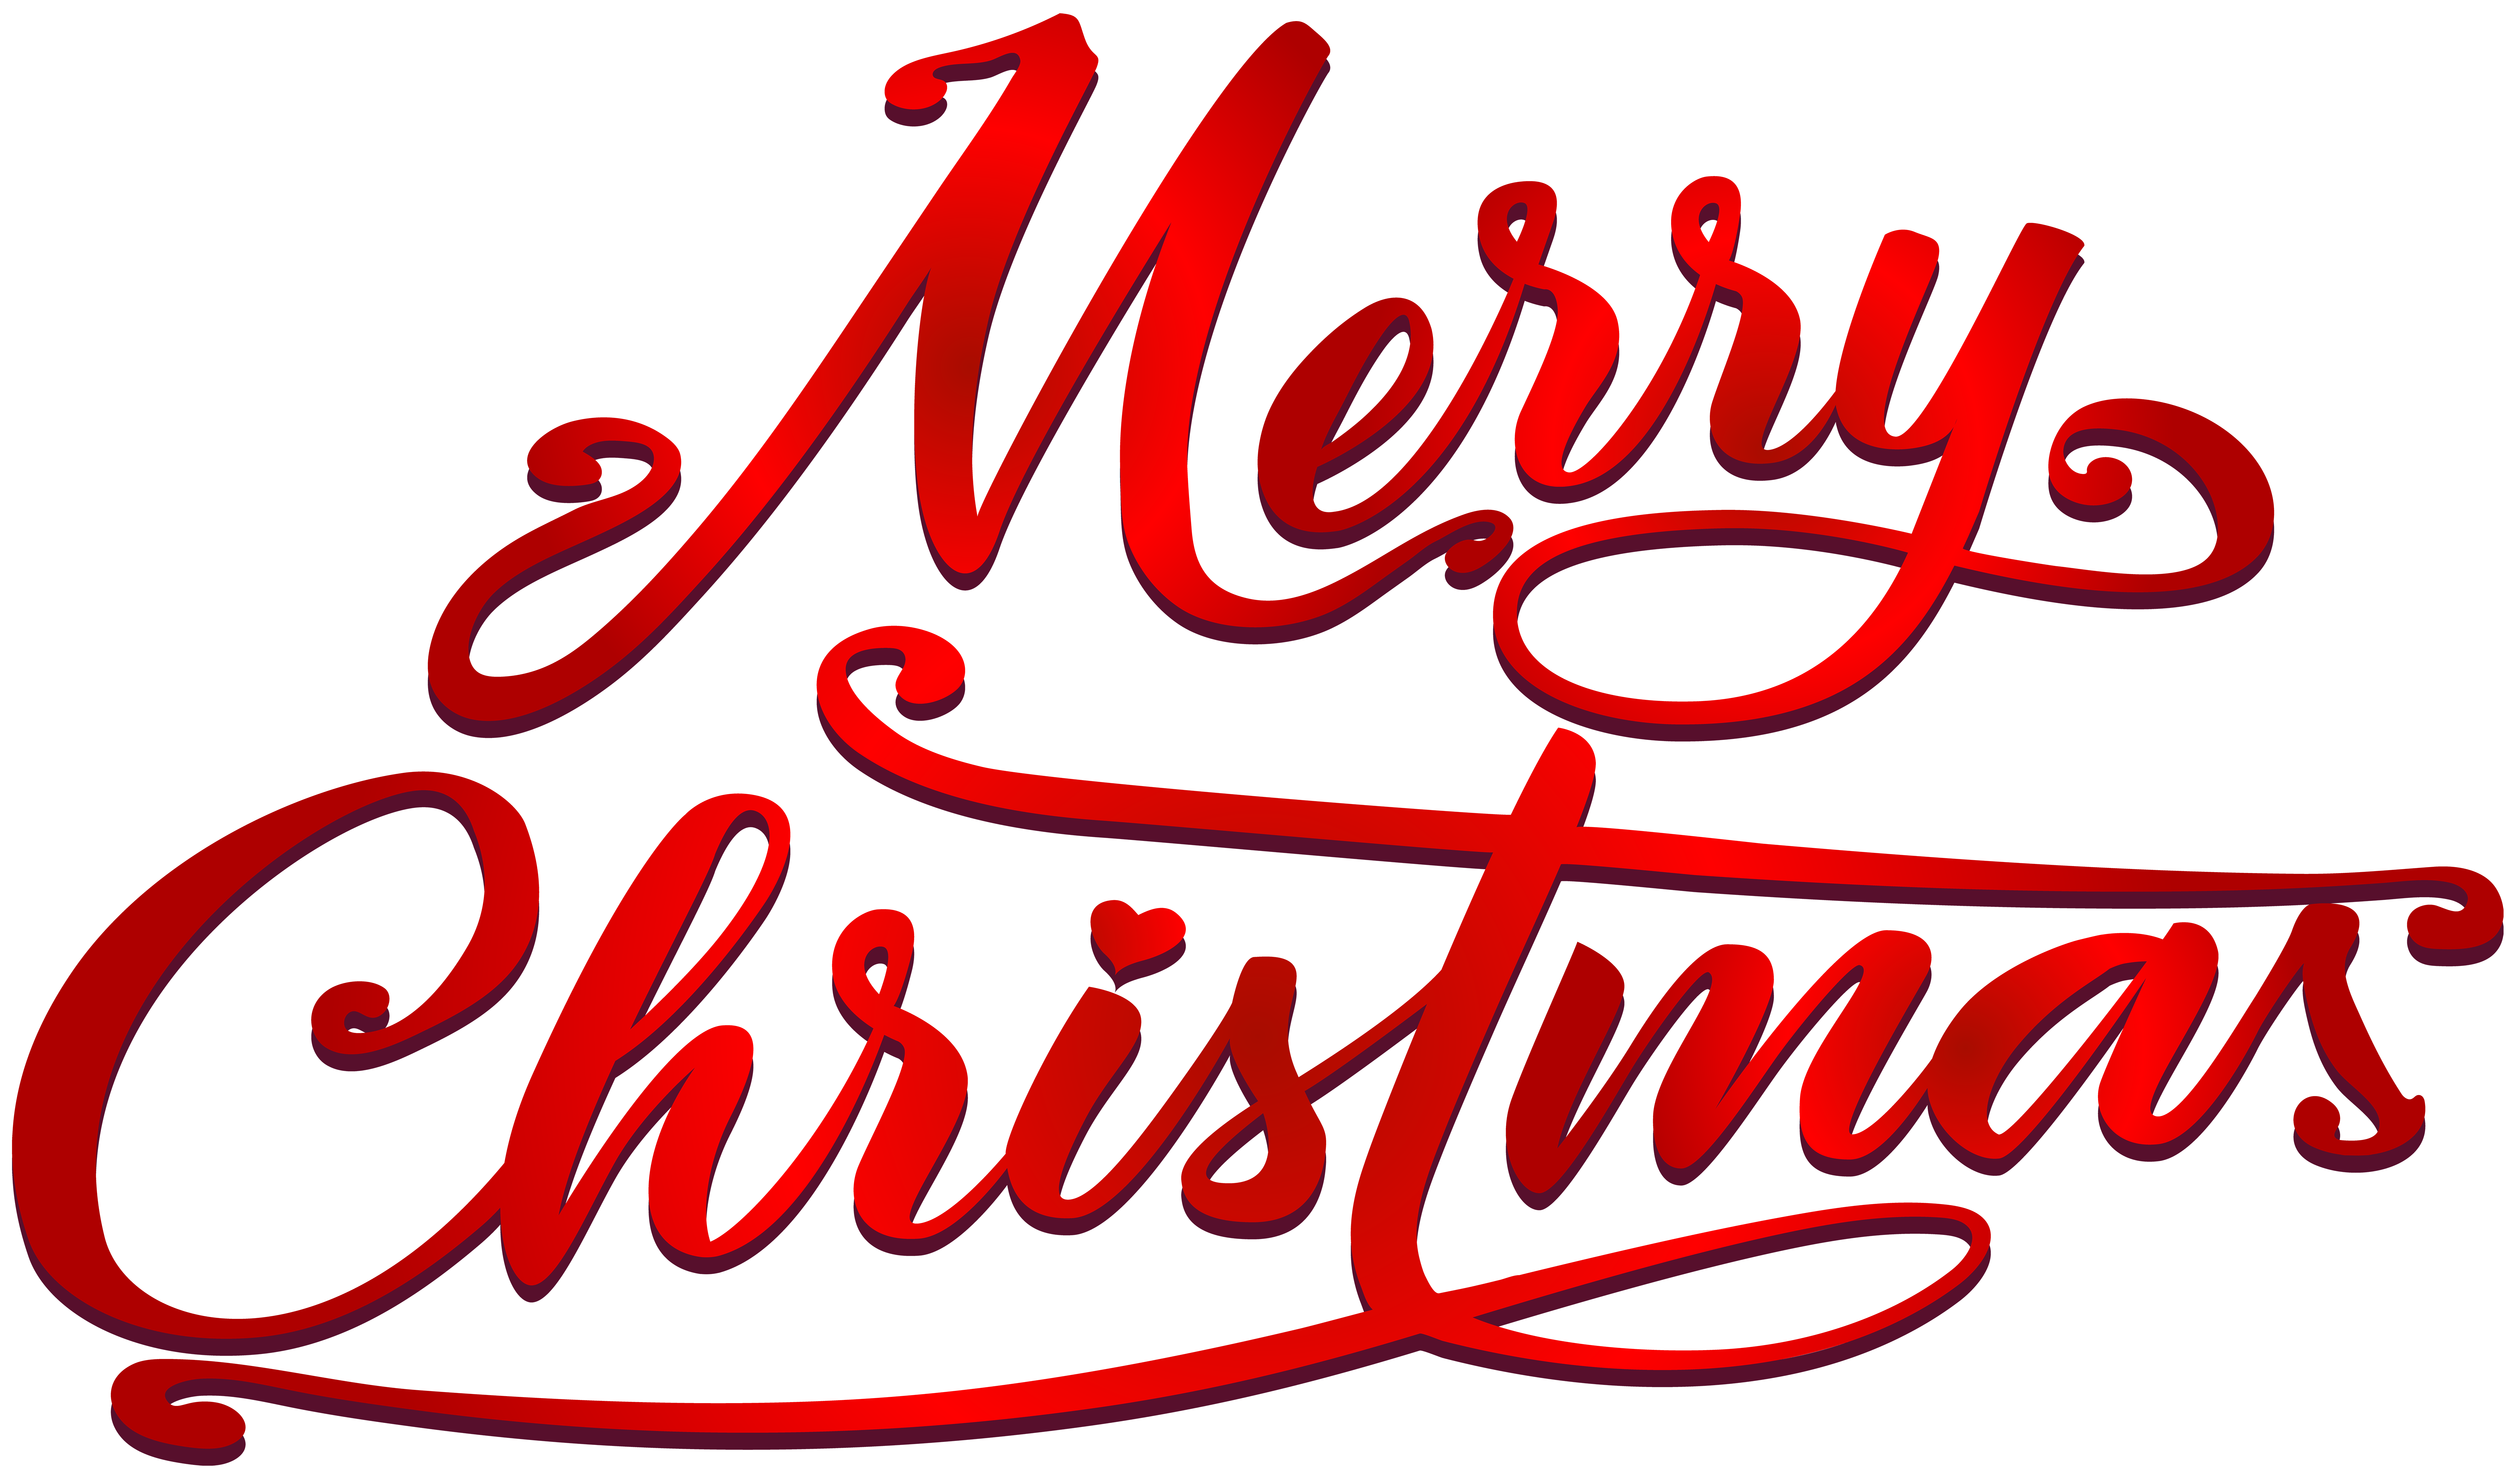 royal-christmas-message-santa-claus-child-merry-christmas-text-png-clip-art-image-png-download